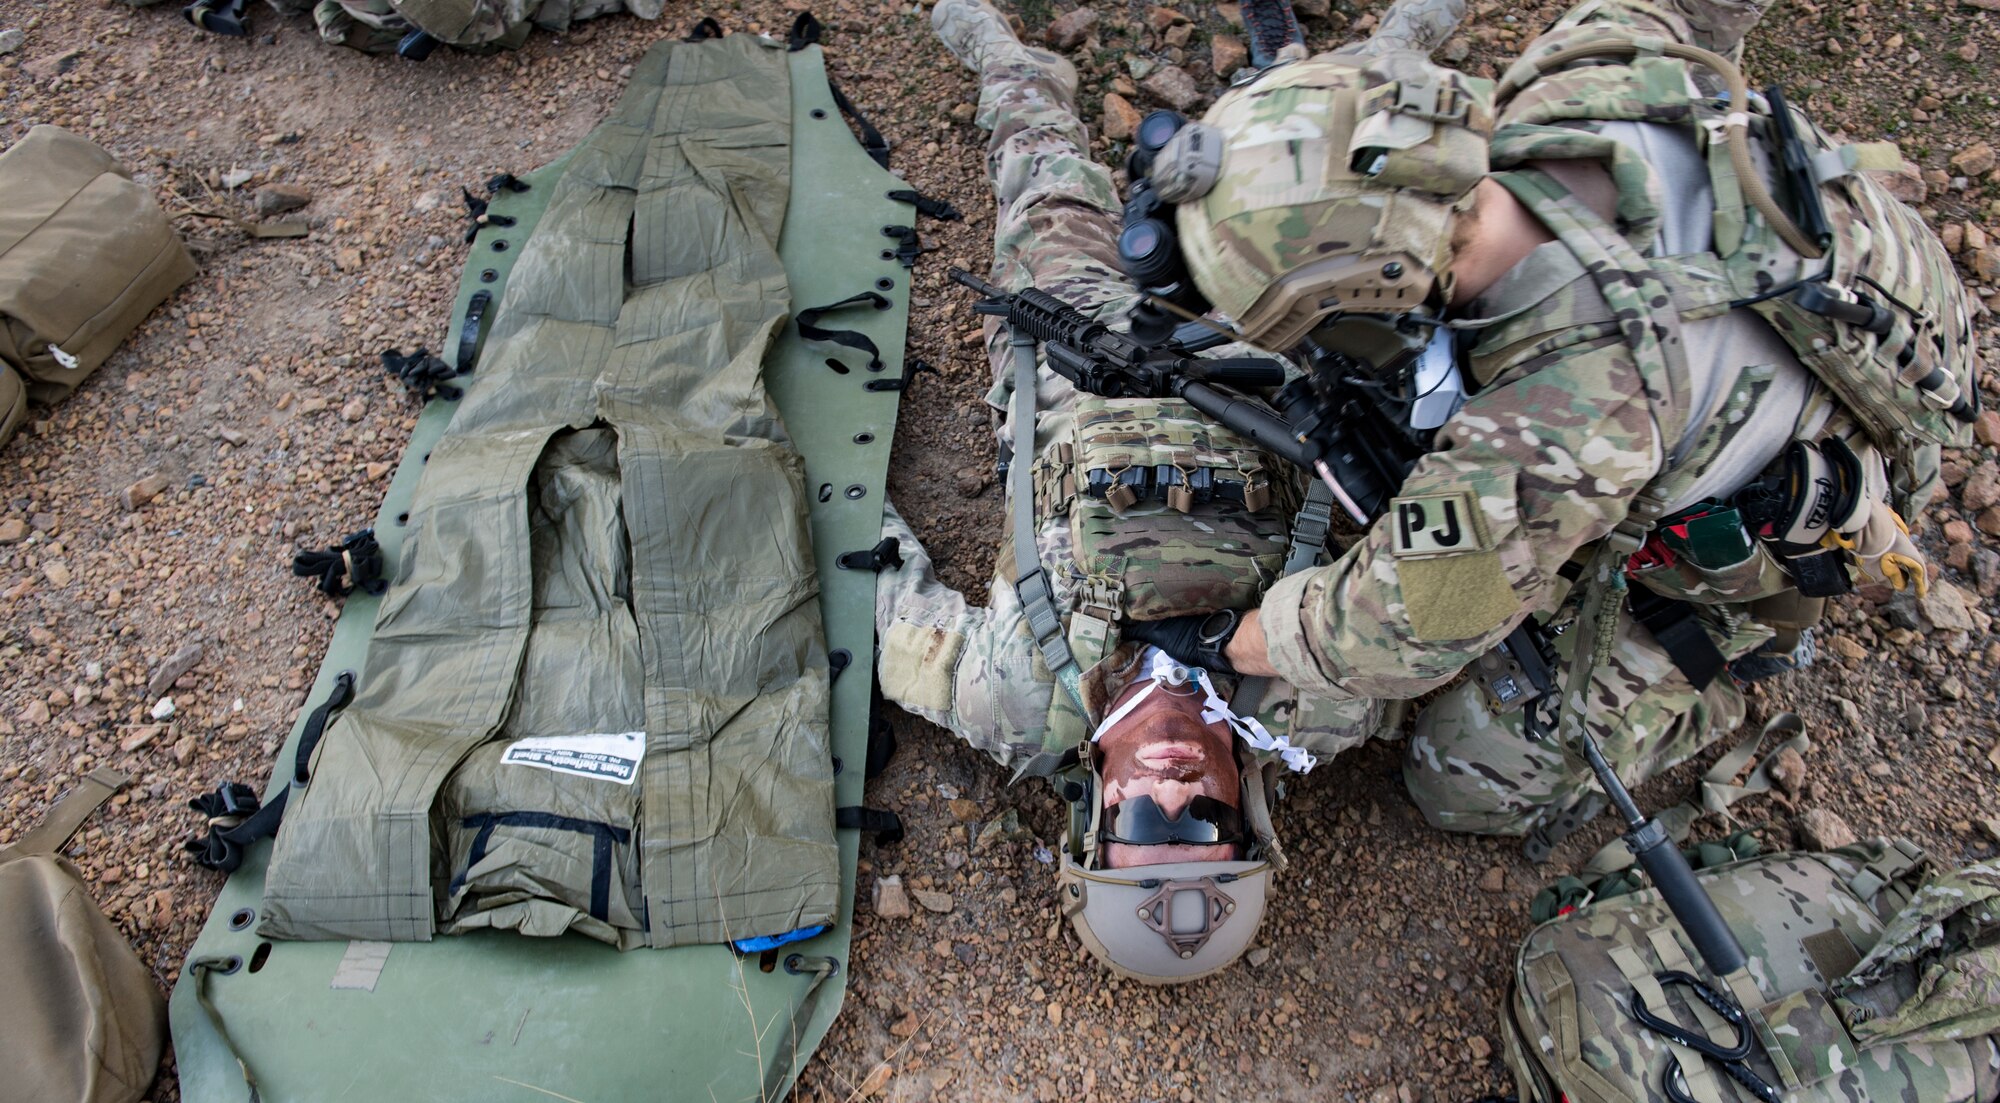 A U.S. Air Force pararescueman, assigned to the 83rd Expeditionary Rescue Squadron, performs tactical combat casualty care on a simulated casualty during a personnel recovery exercise at an undisclosed location in Afghanistan, March 6, 2018.